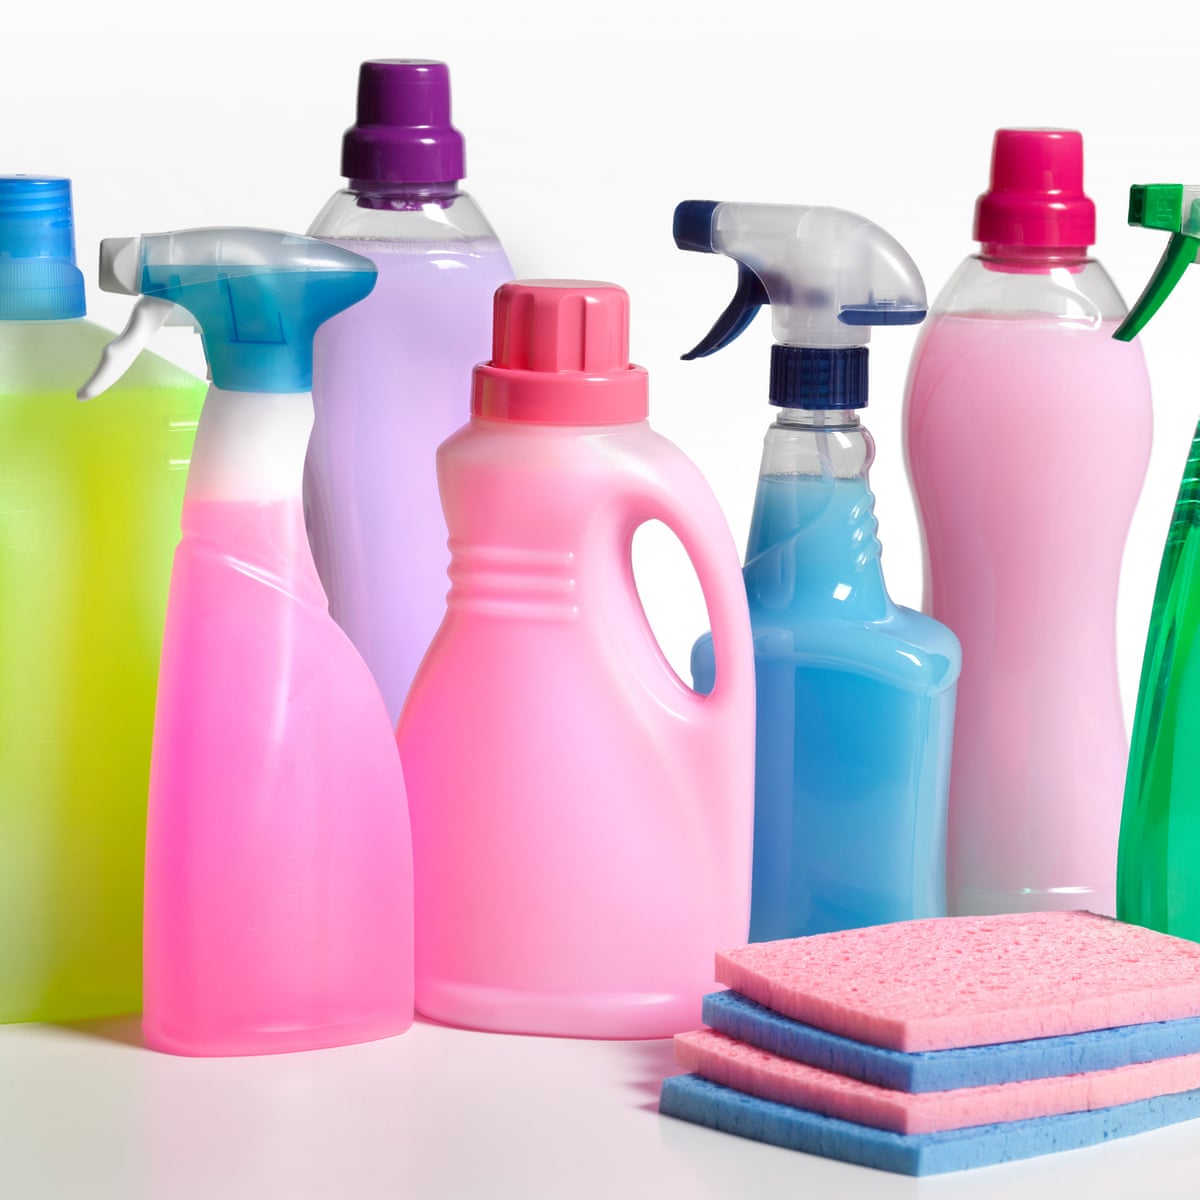 Spring Clean Your Cleaners Many Surface Products Don T Actually